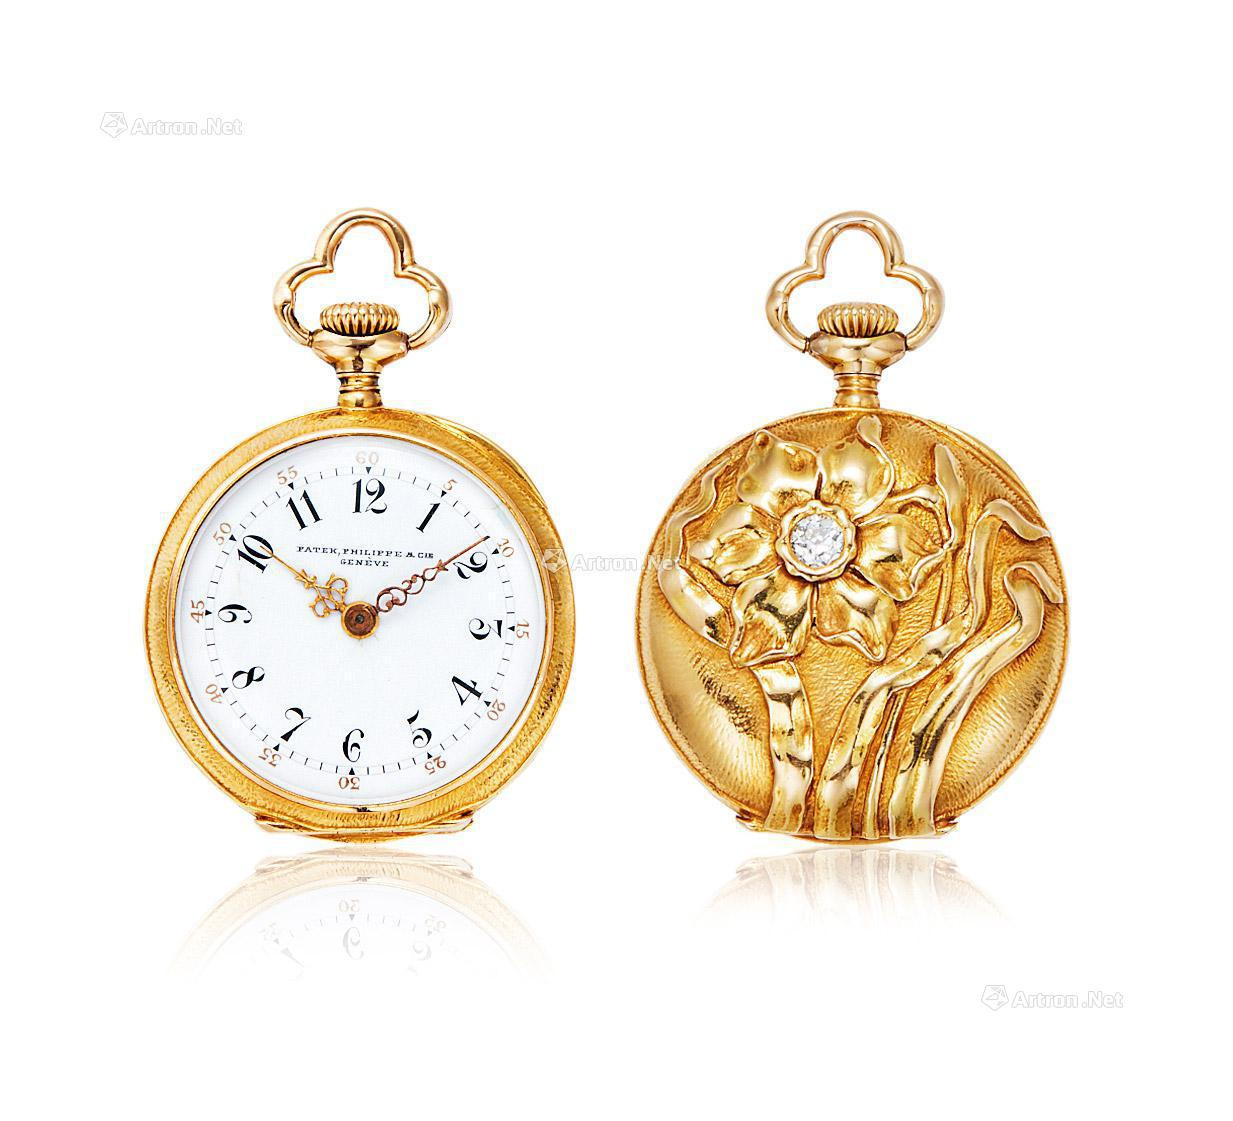 PATEK PHILIPPE  A VERY FINE YELLOW GOLD AND DIAMOND-SET OPEN-FACED POCKET WATCH， WITH FLORAL PATTERNS， WITH EXTRACT FROM ARCHIVES